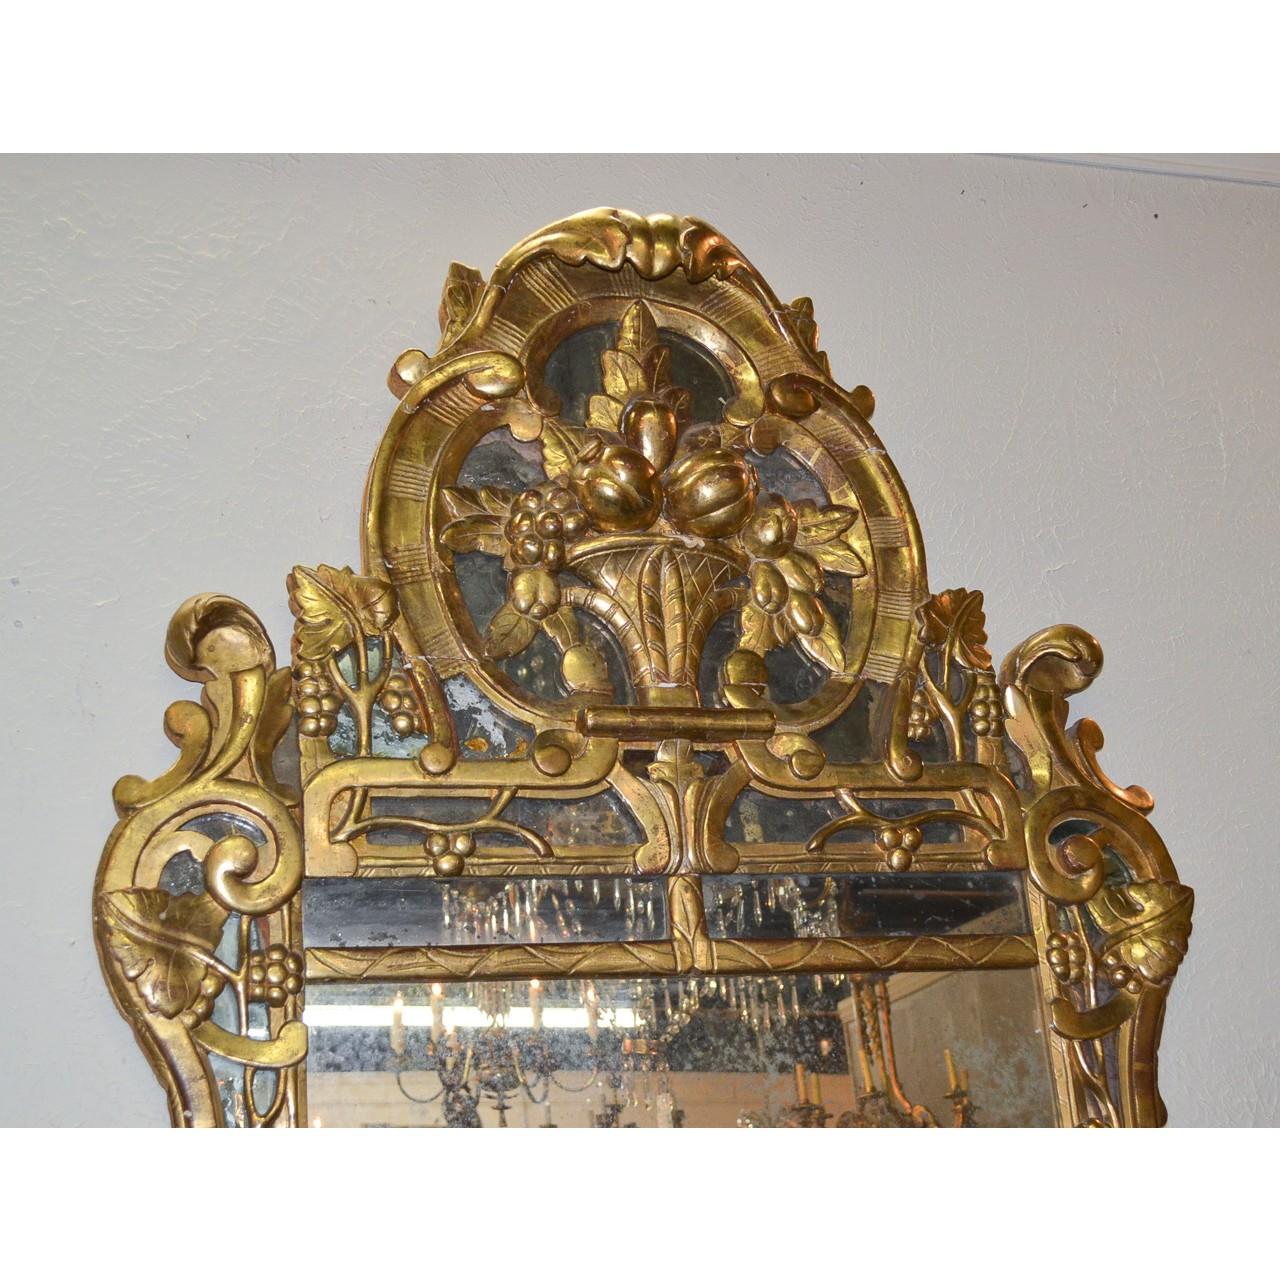 Magnificent 19th century Northern Italian giltwood wall or console mirror. The crest ornately carved and featuring a centre cartouche carved in bas-relief depicting a vessel overflowing with fruits and leaves and flanked by leaf scrolls, grapes and